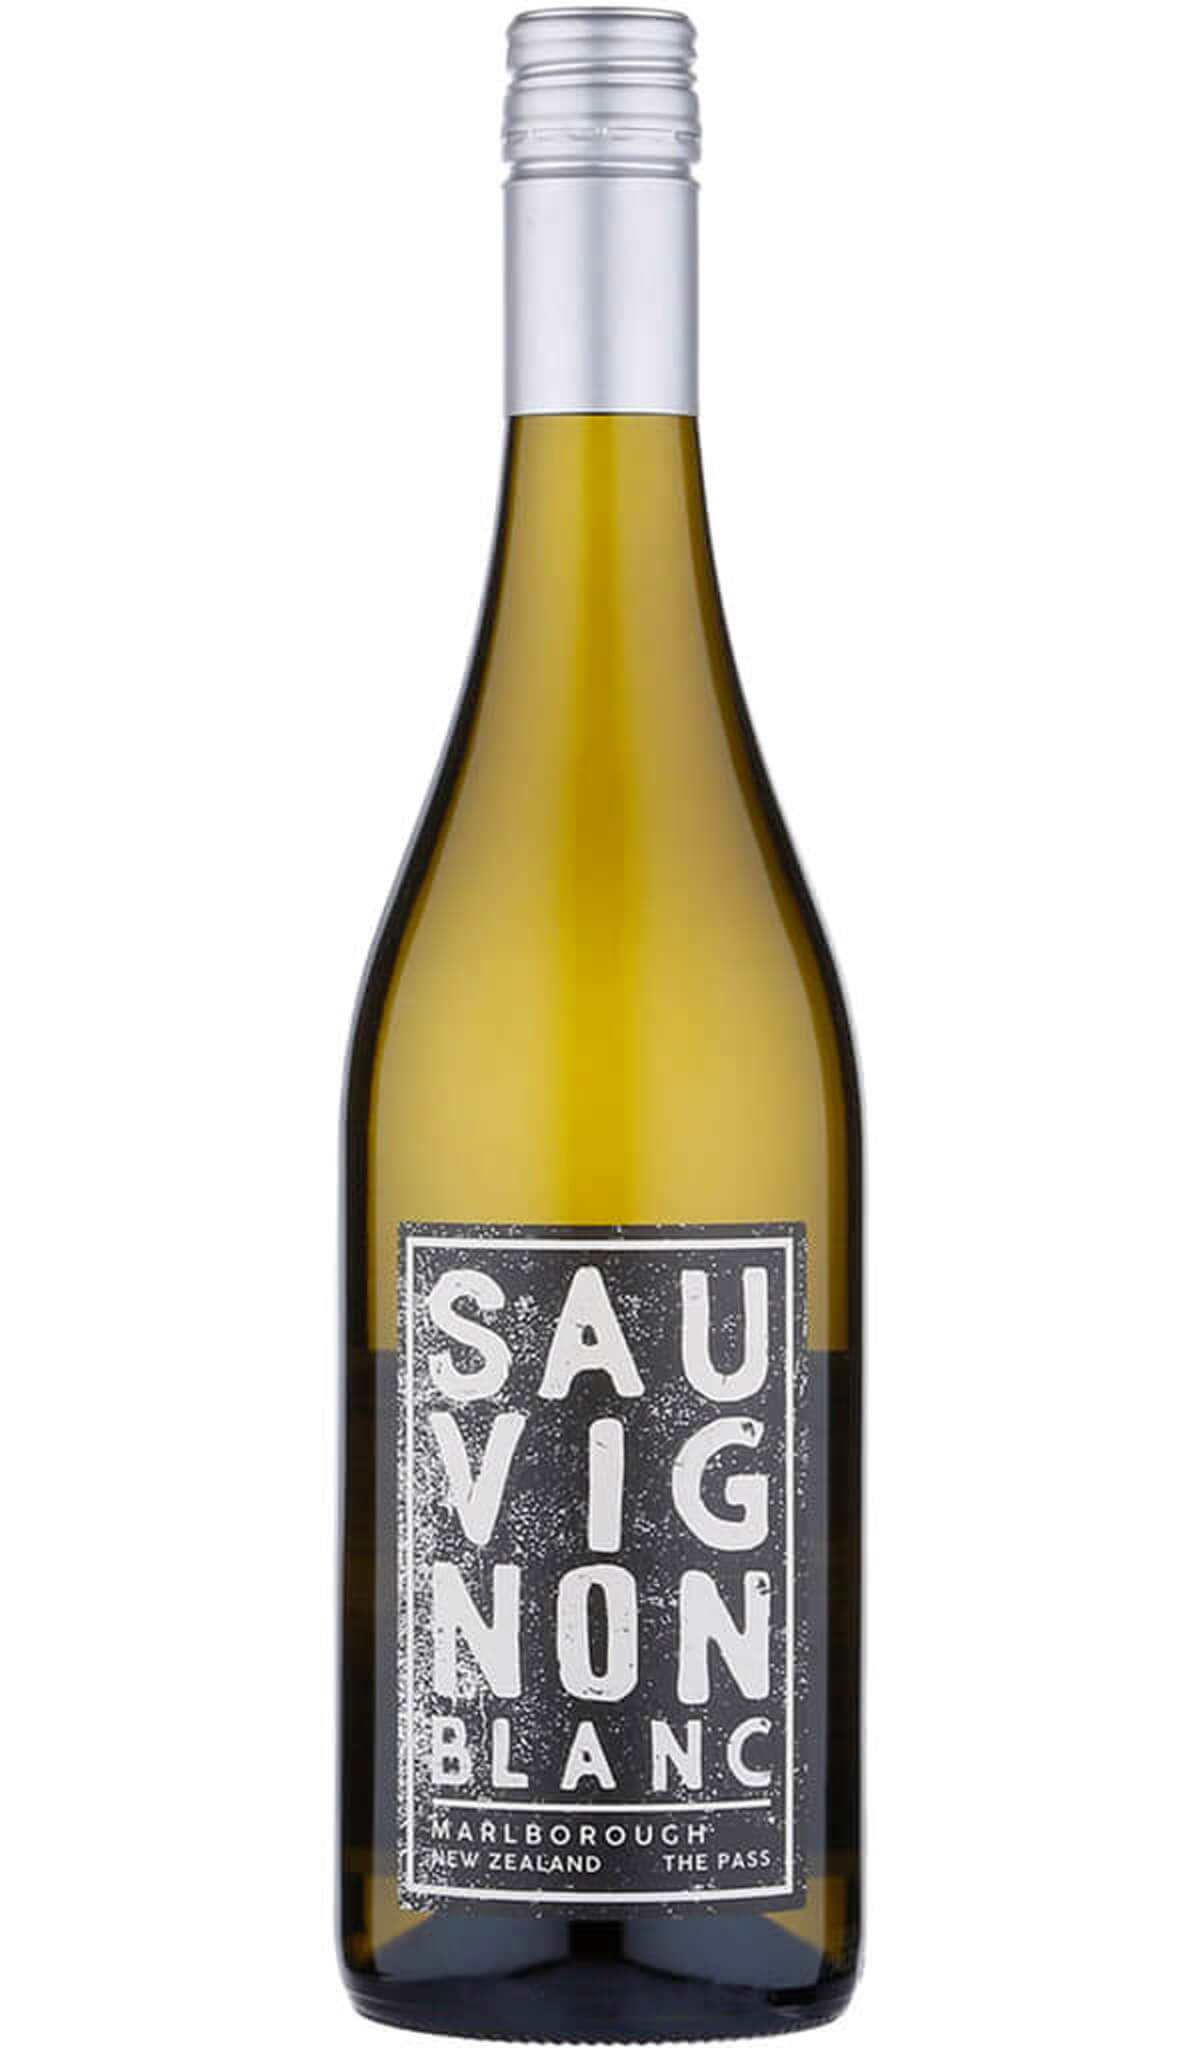 Find out more or buy The Pass Marlborough Sauvignon Blanc 2023 online at Wine Sellers Direct - Australia’s independent liquor specialists.